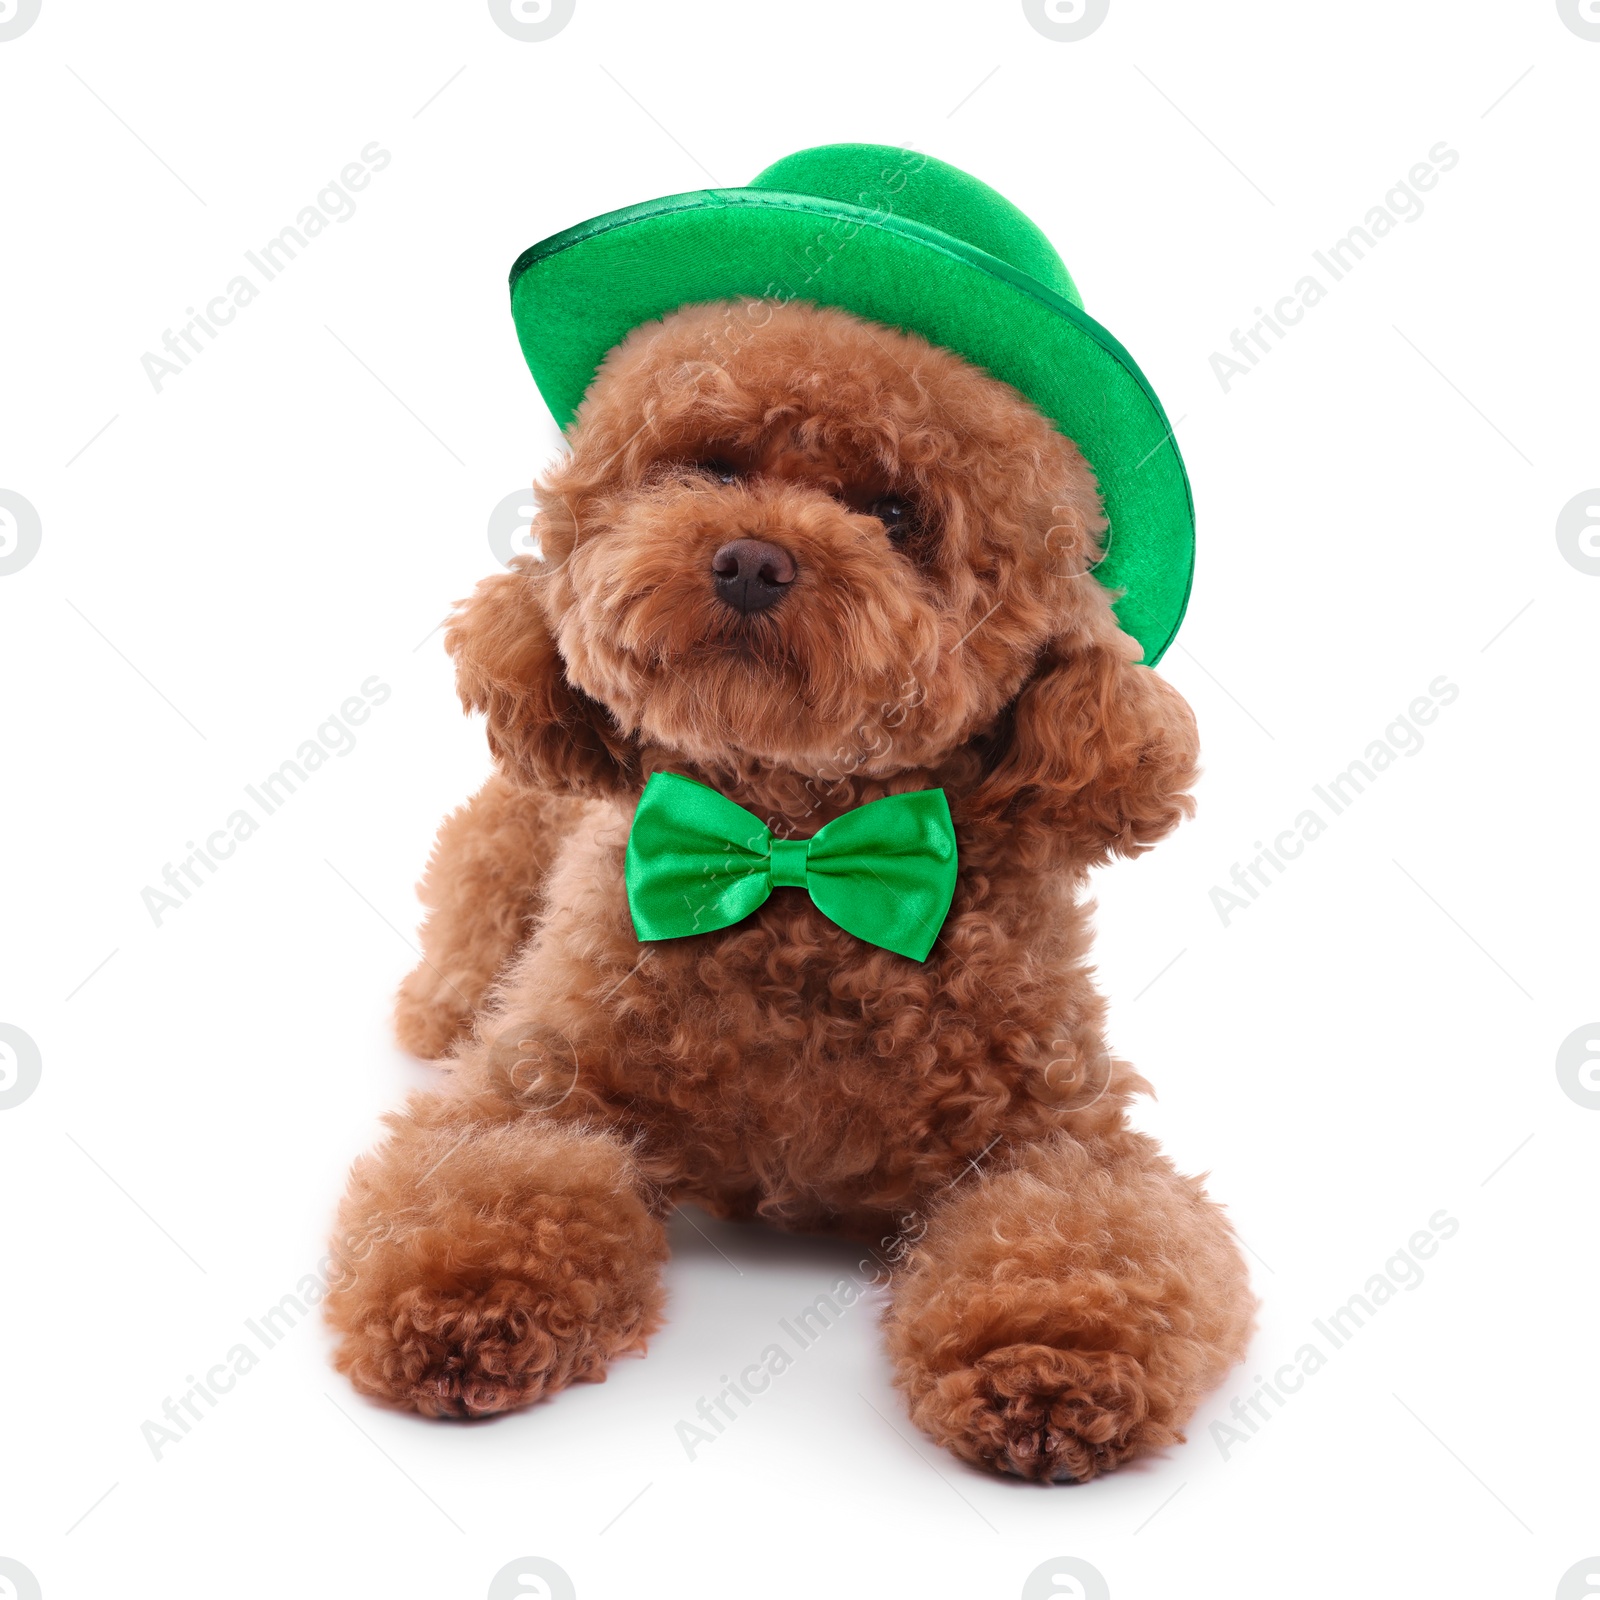 Image of St. Patrick's day celebration. Cute Maltipoo dog with leprechaun hat and green bow tie isolated on white